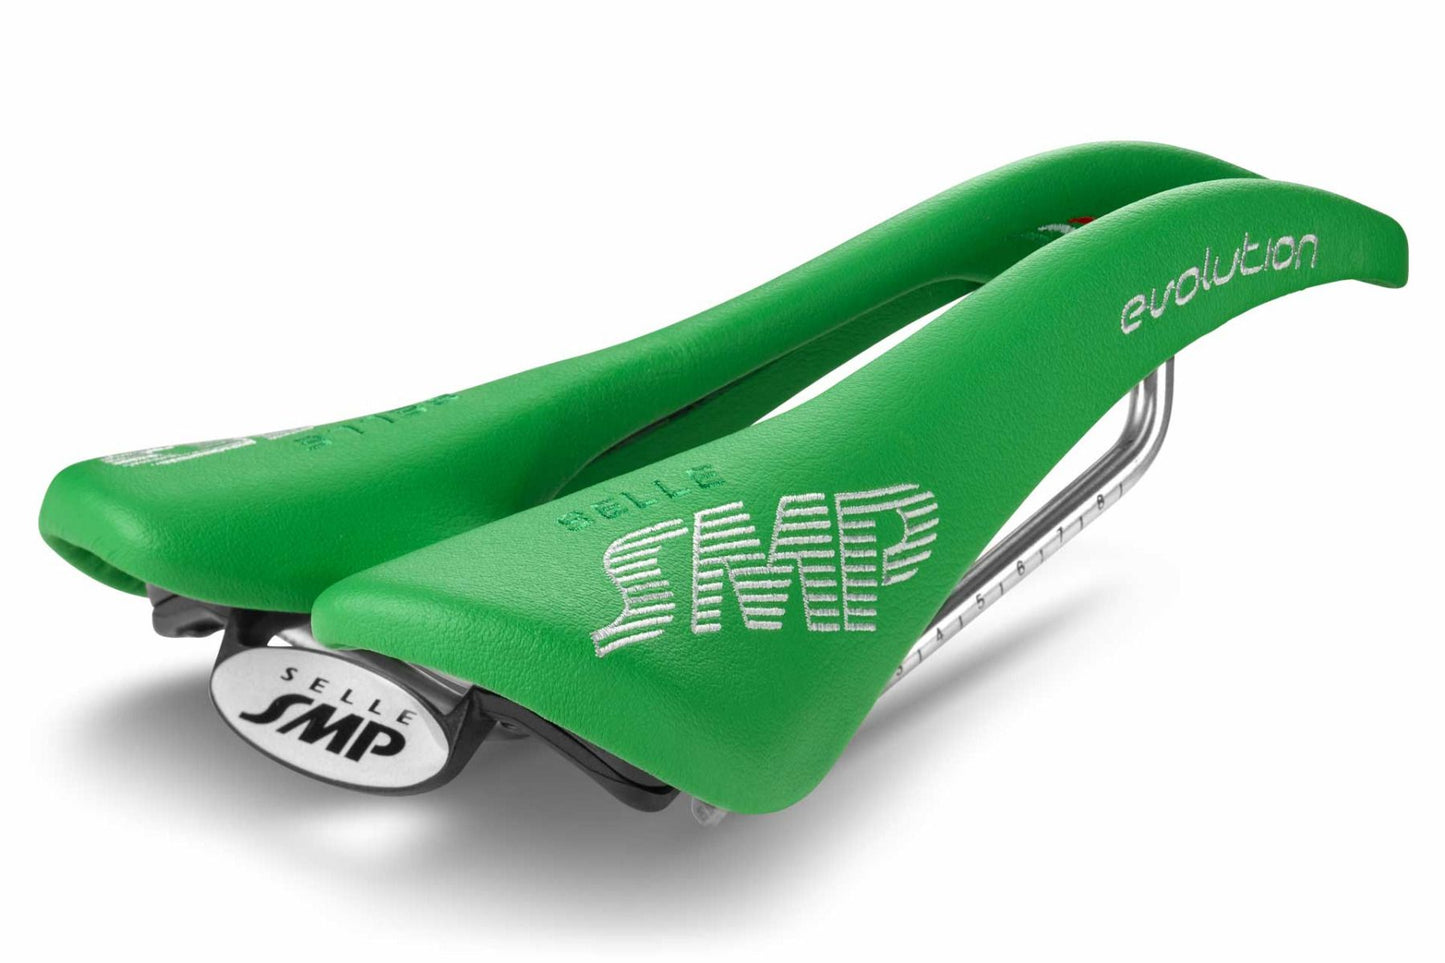 Selle SMP Evolution Saddle with Steel Rails (Green)